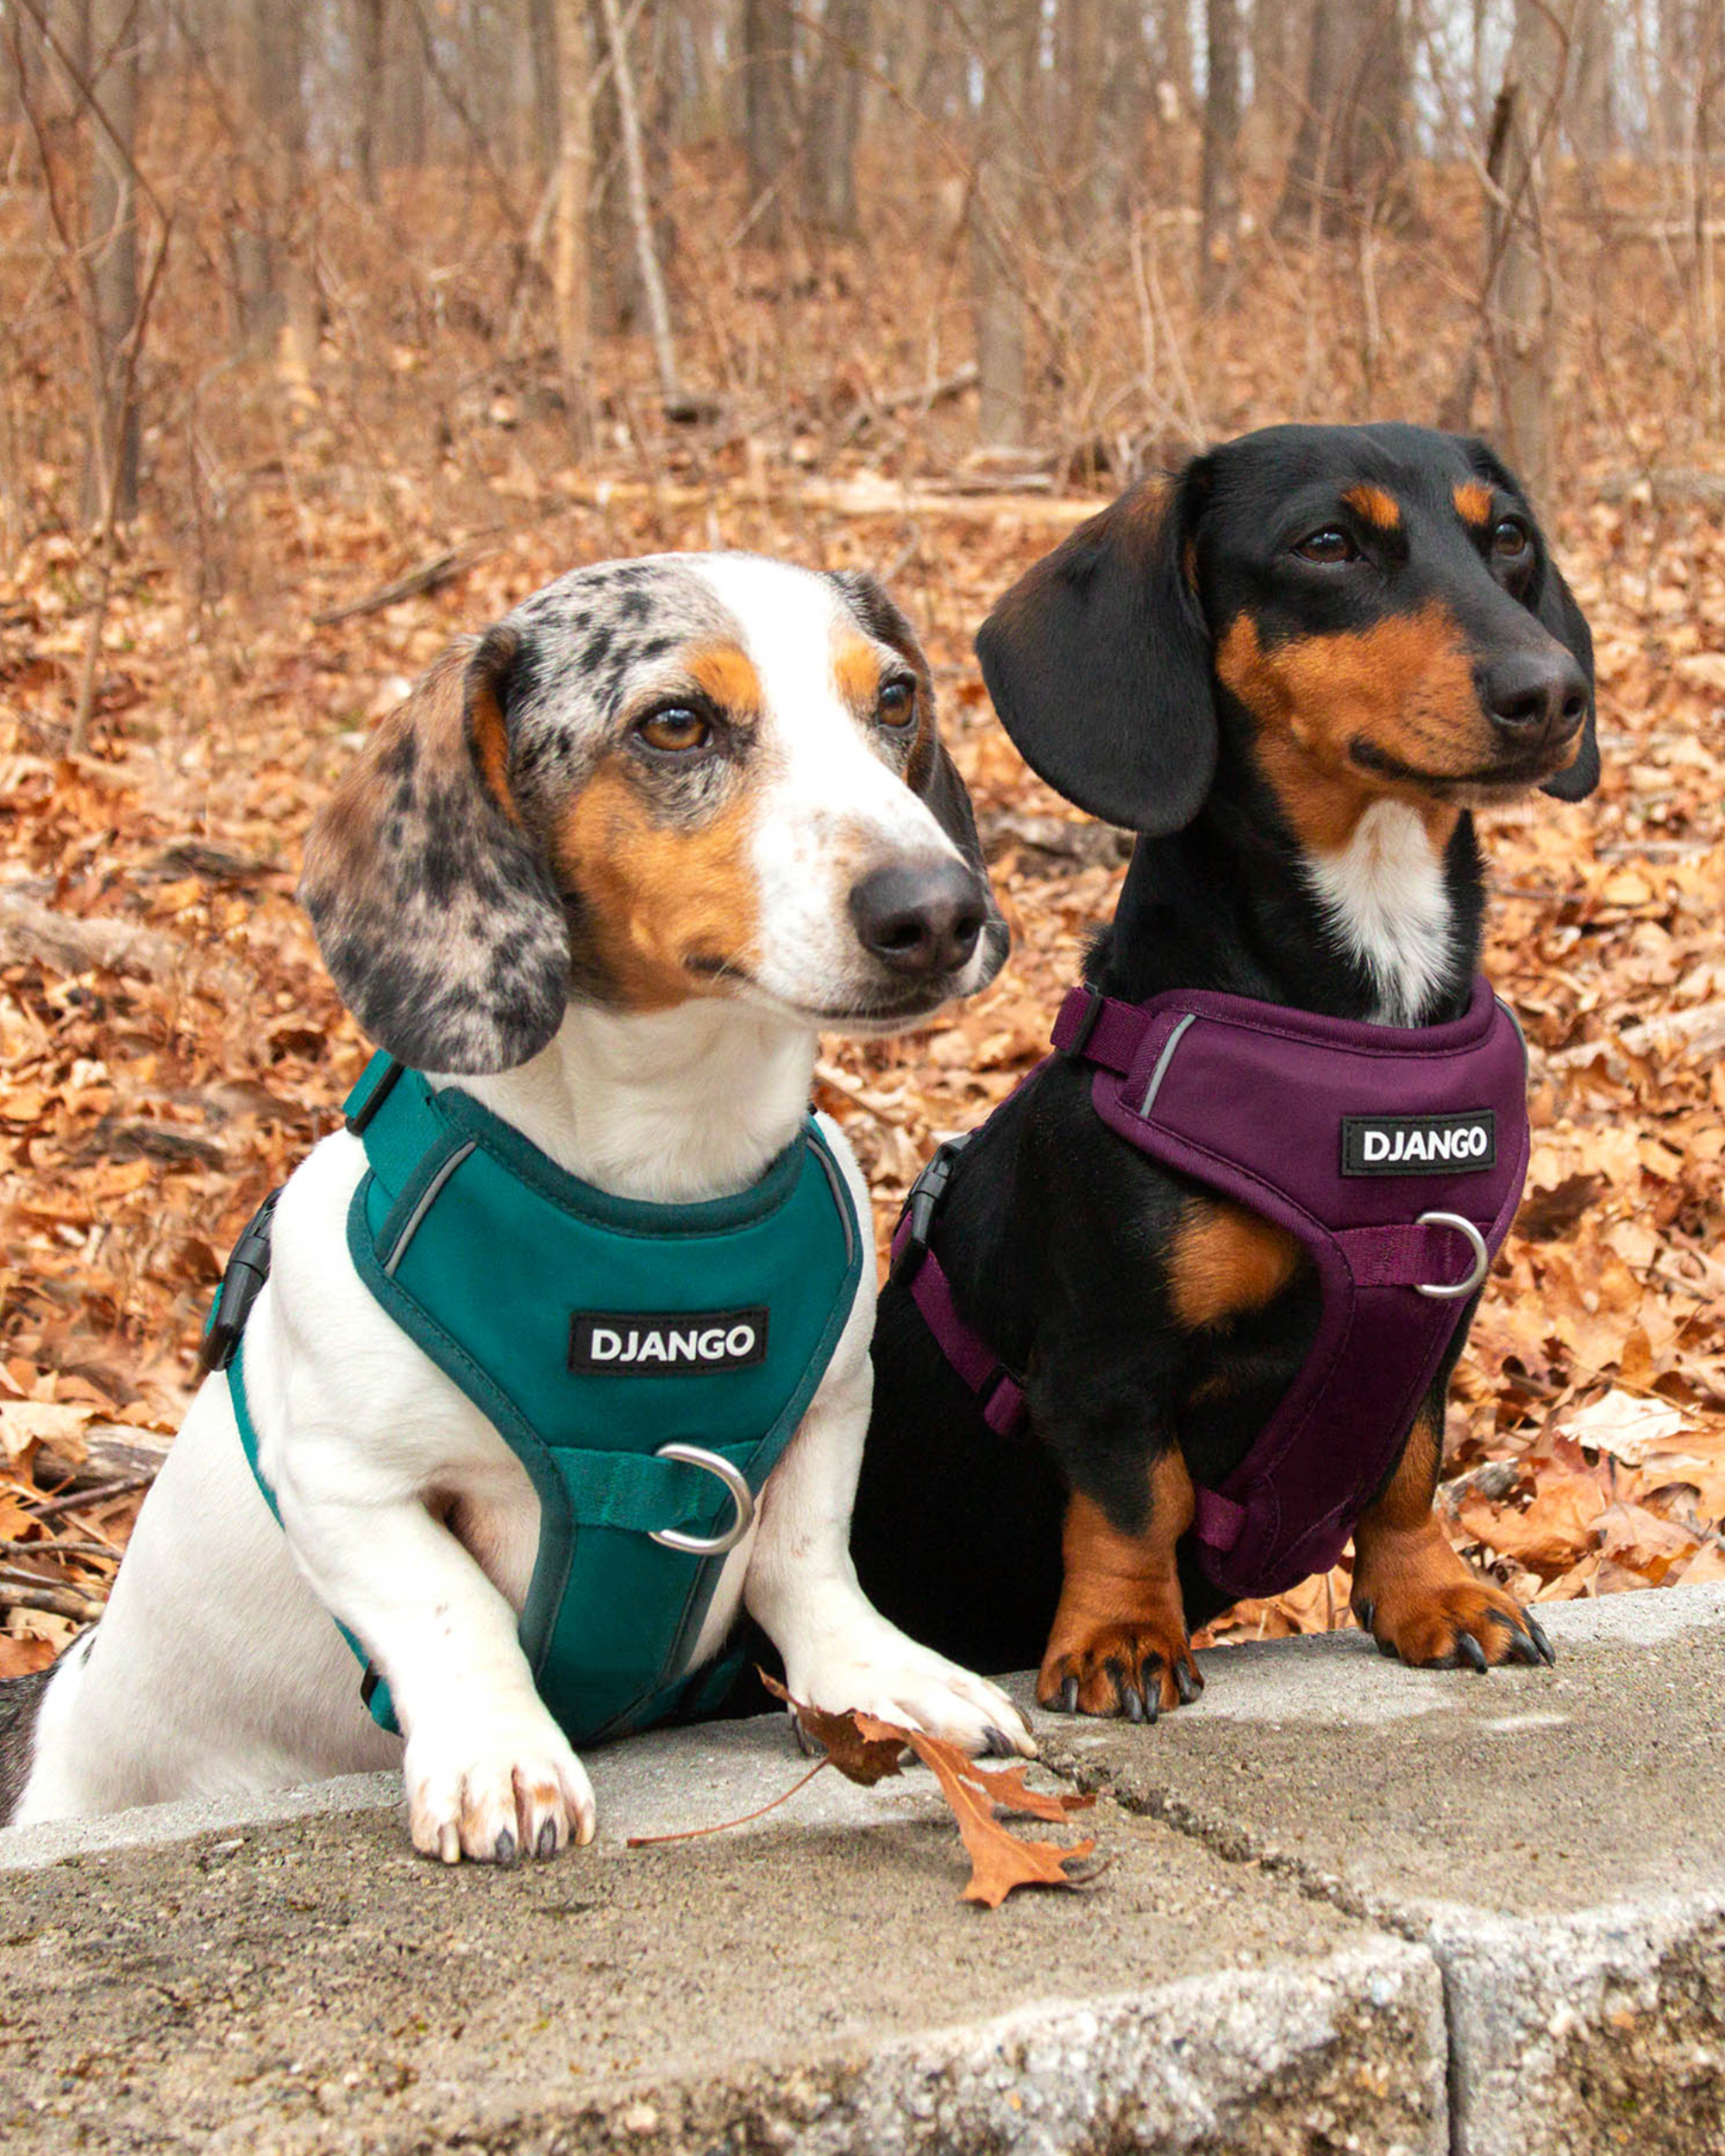 Dachshunds Gretta and Eko are wearing their DJANGO dog harnesses. DJANGO's Tahoe No Pull Dog Harness has a weather-resistant and padded neoprene exterior, a narrow and deep harness body (to prevent the risk of chafing) reflective piping, and soft webbing. - djangobrand.com